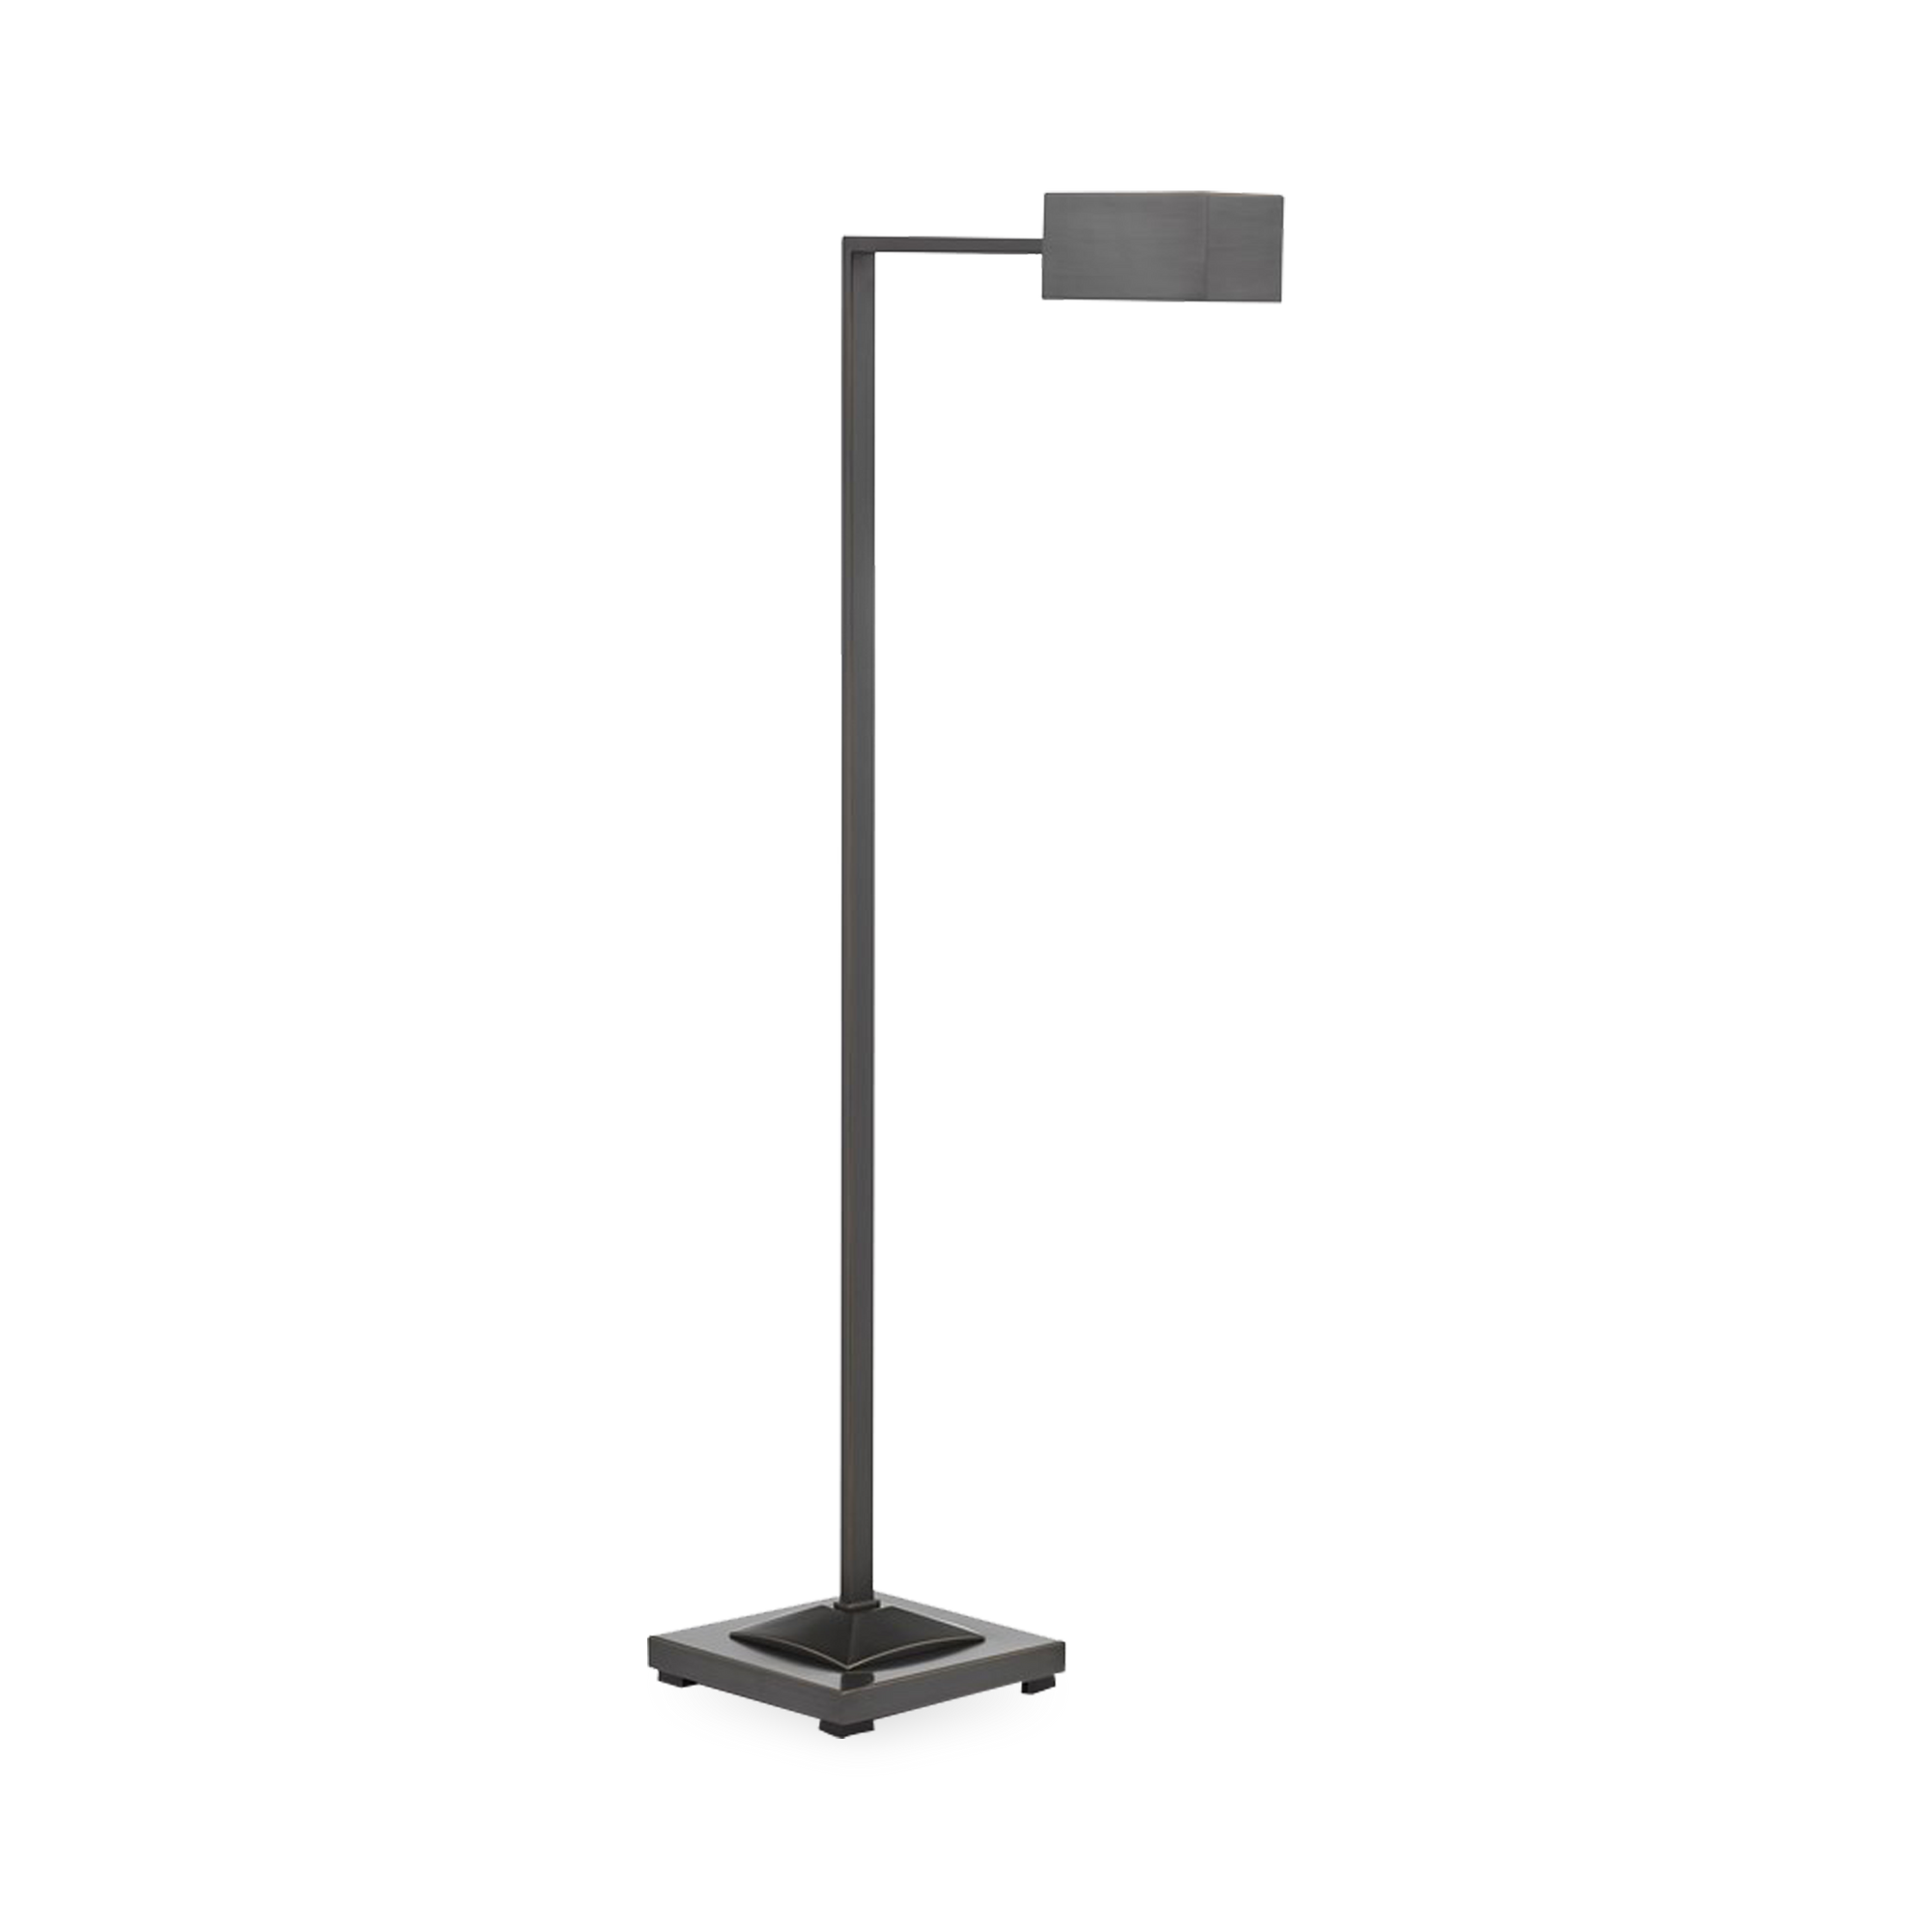 The Boxy Floor Lamp will be popular with any serious reader thanks to the rectangular shade extending from its L-shaped body.